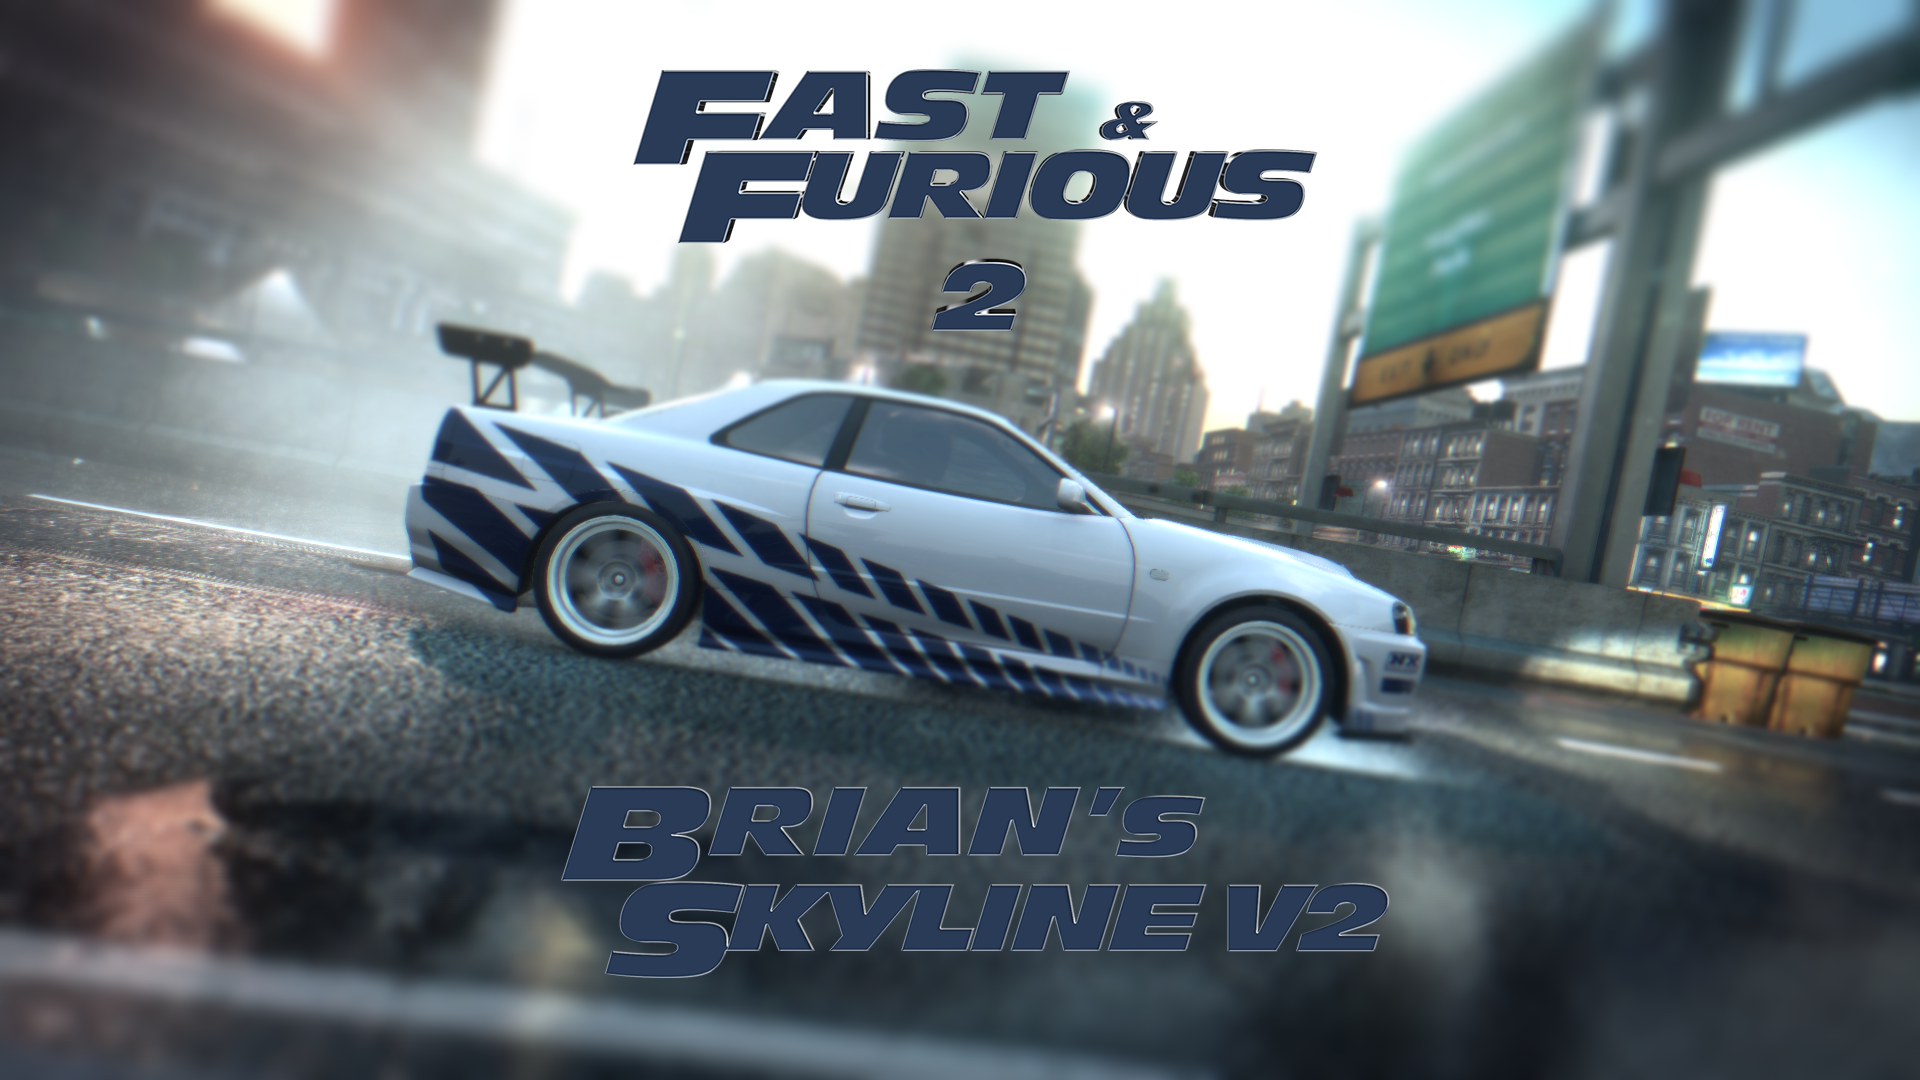 Need For Speed Most Wanted 2012 Nissan Fast & Furious 2 Skyline